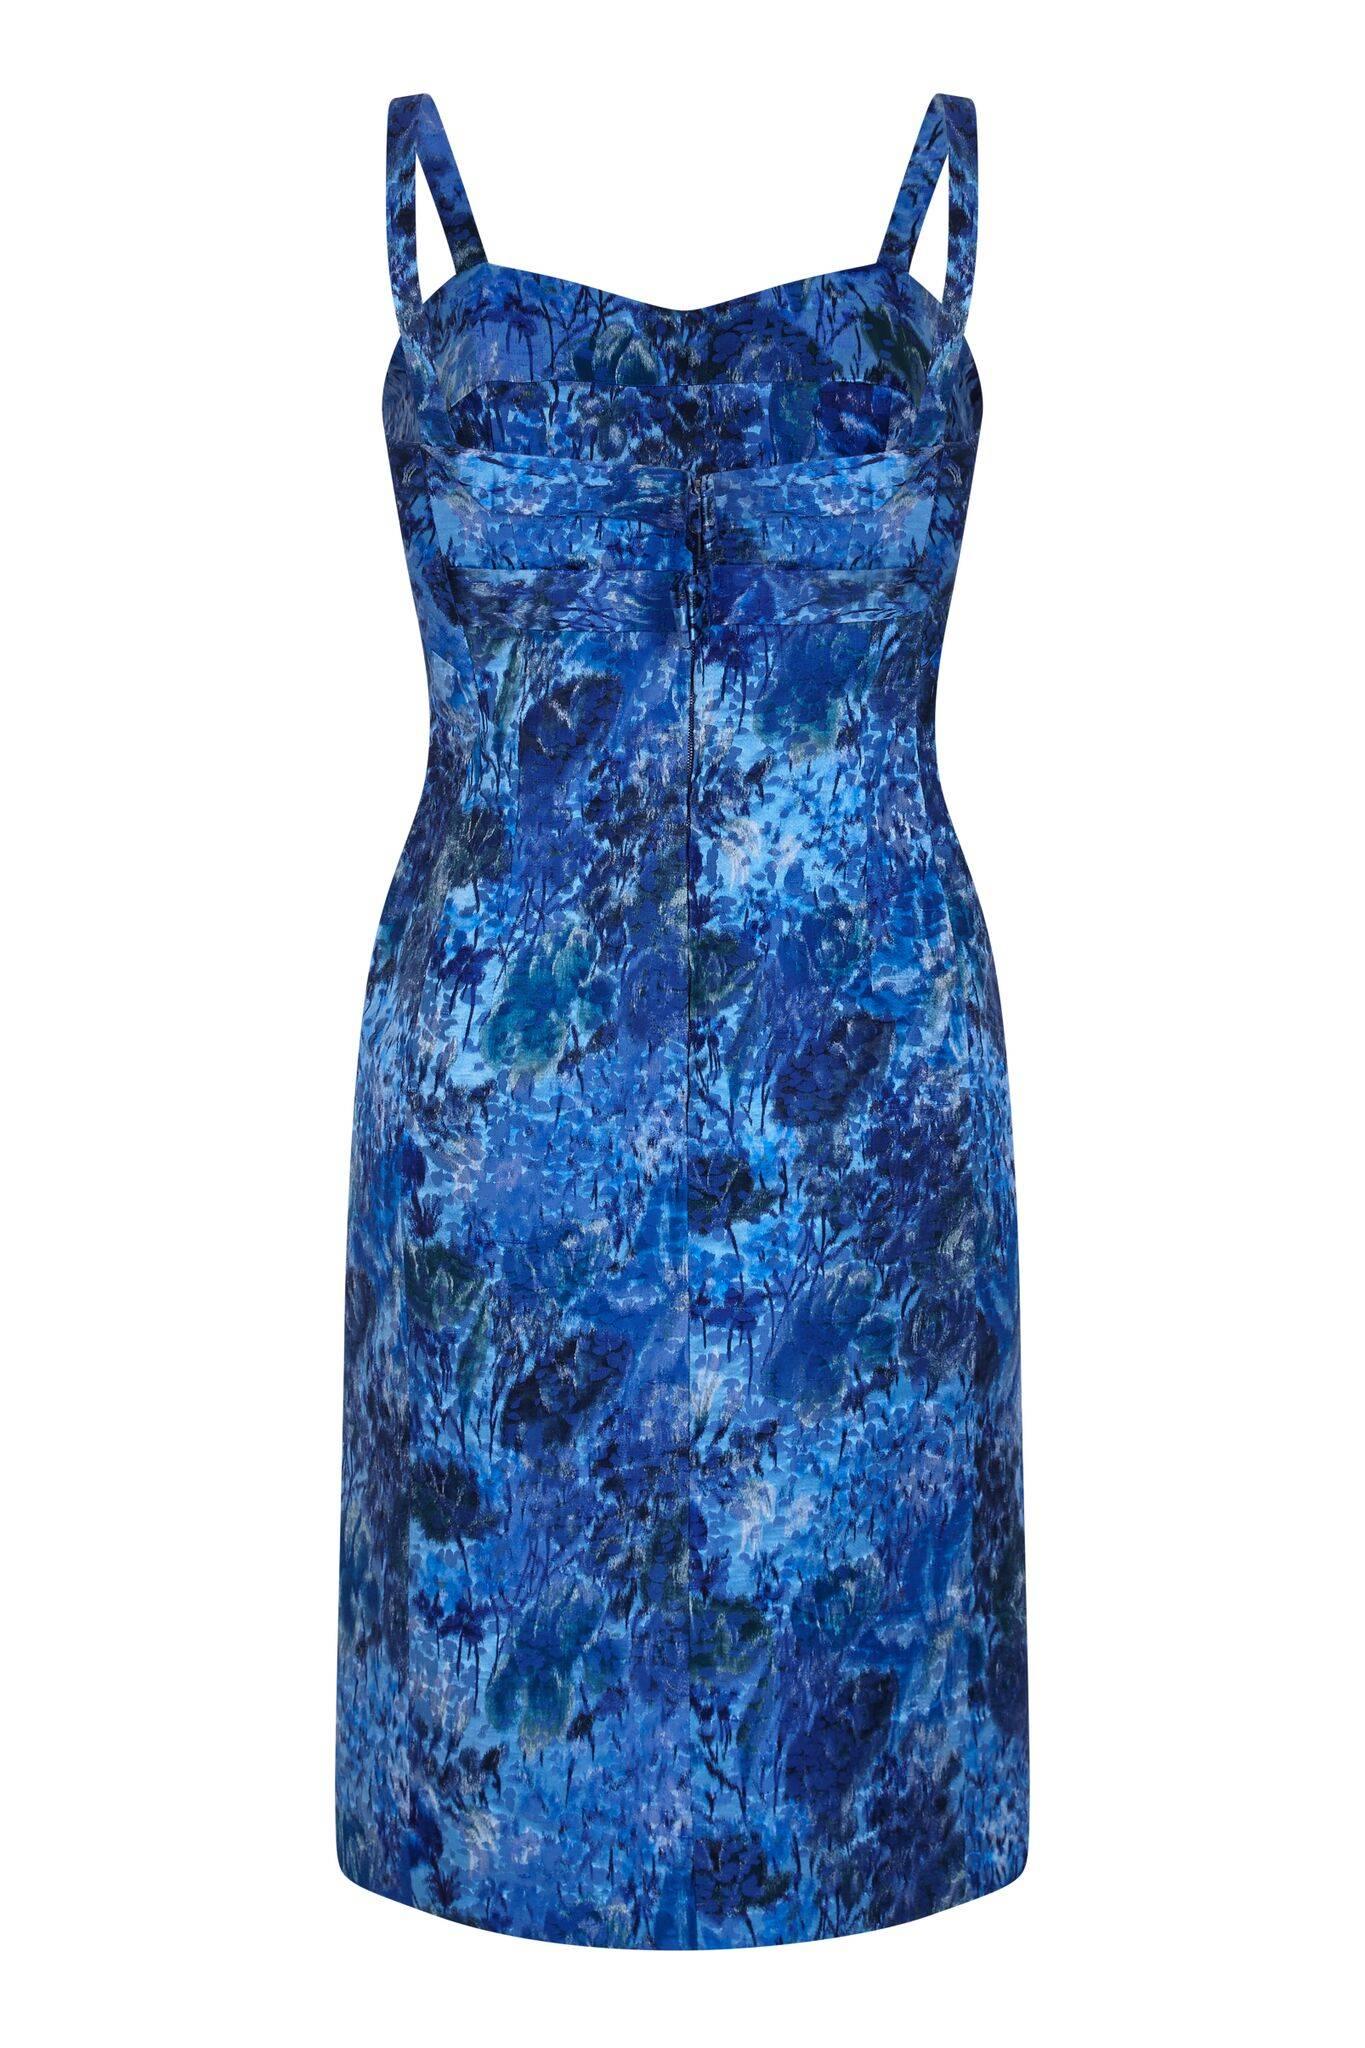 This impeccable piece of 1960s unlabelled French Couture set in textured silk fabric is of exquisite construction. The soft abstracted floral design in cobalt blue, ultramarine, turquoise, navy and forest green is slightly embossed with a mottled